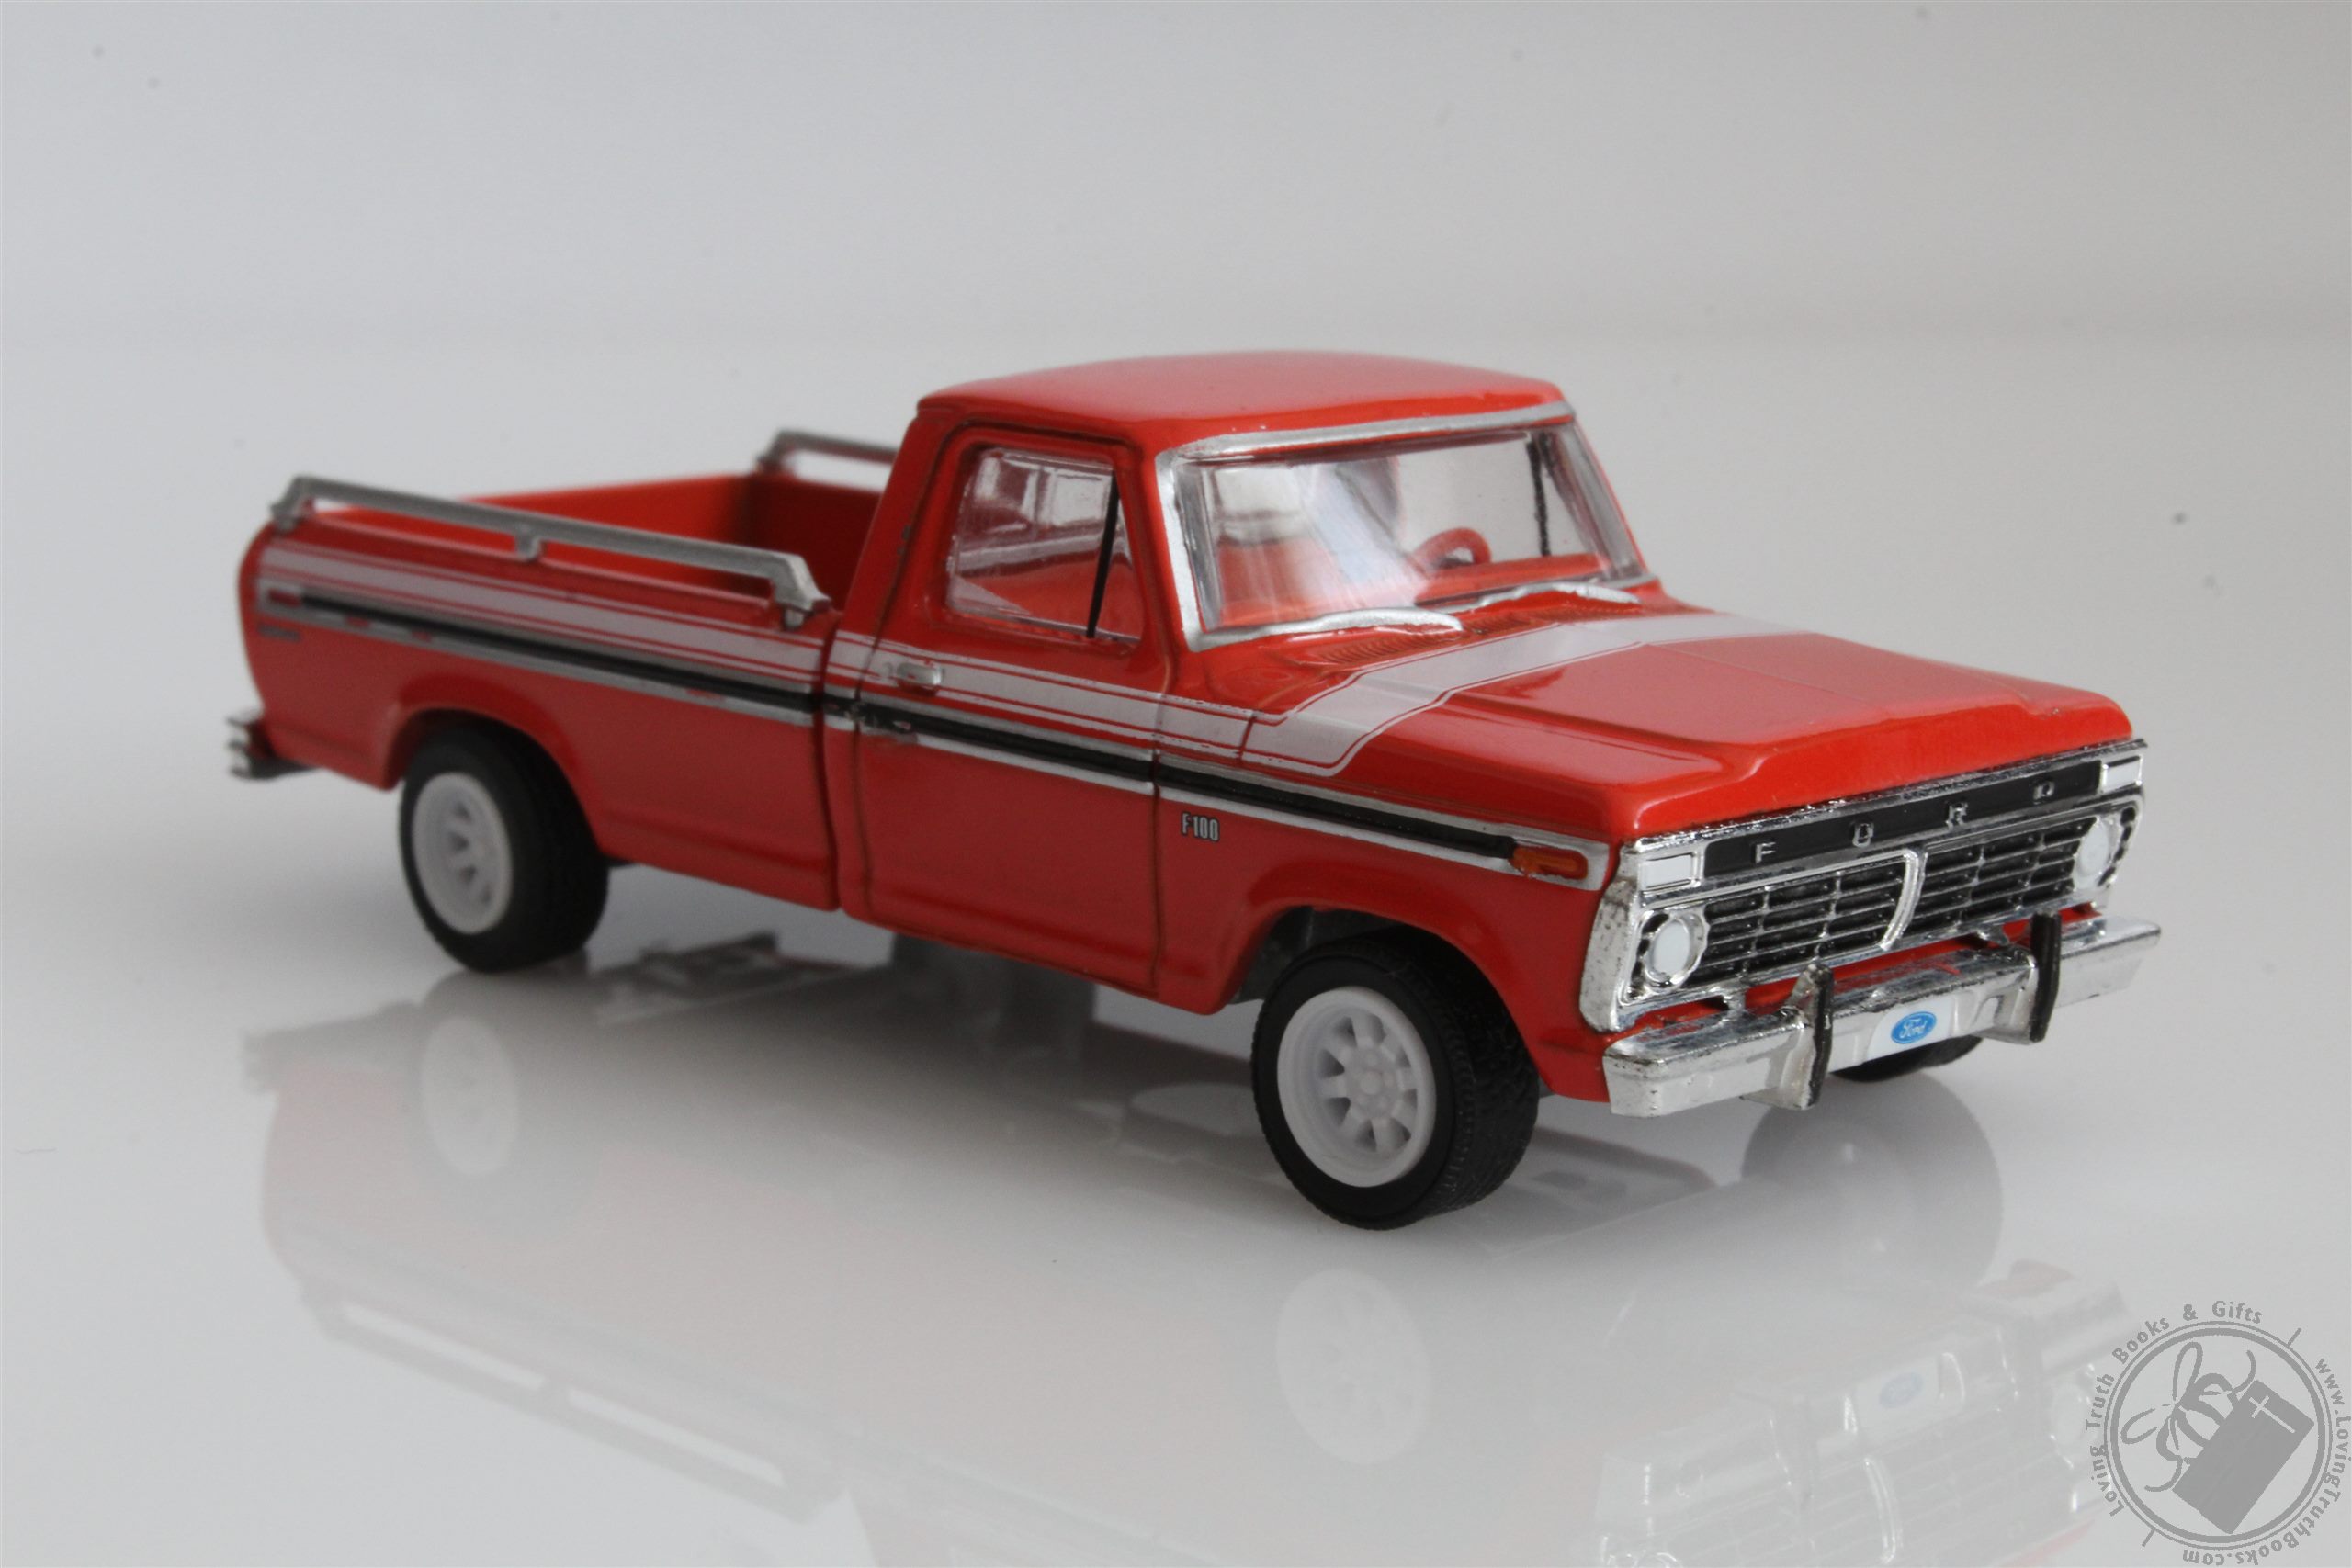 Greenlight Hobby Shop 6 1975 Ford F100 Explorer Pick Up Truck with Spare Tires 